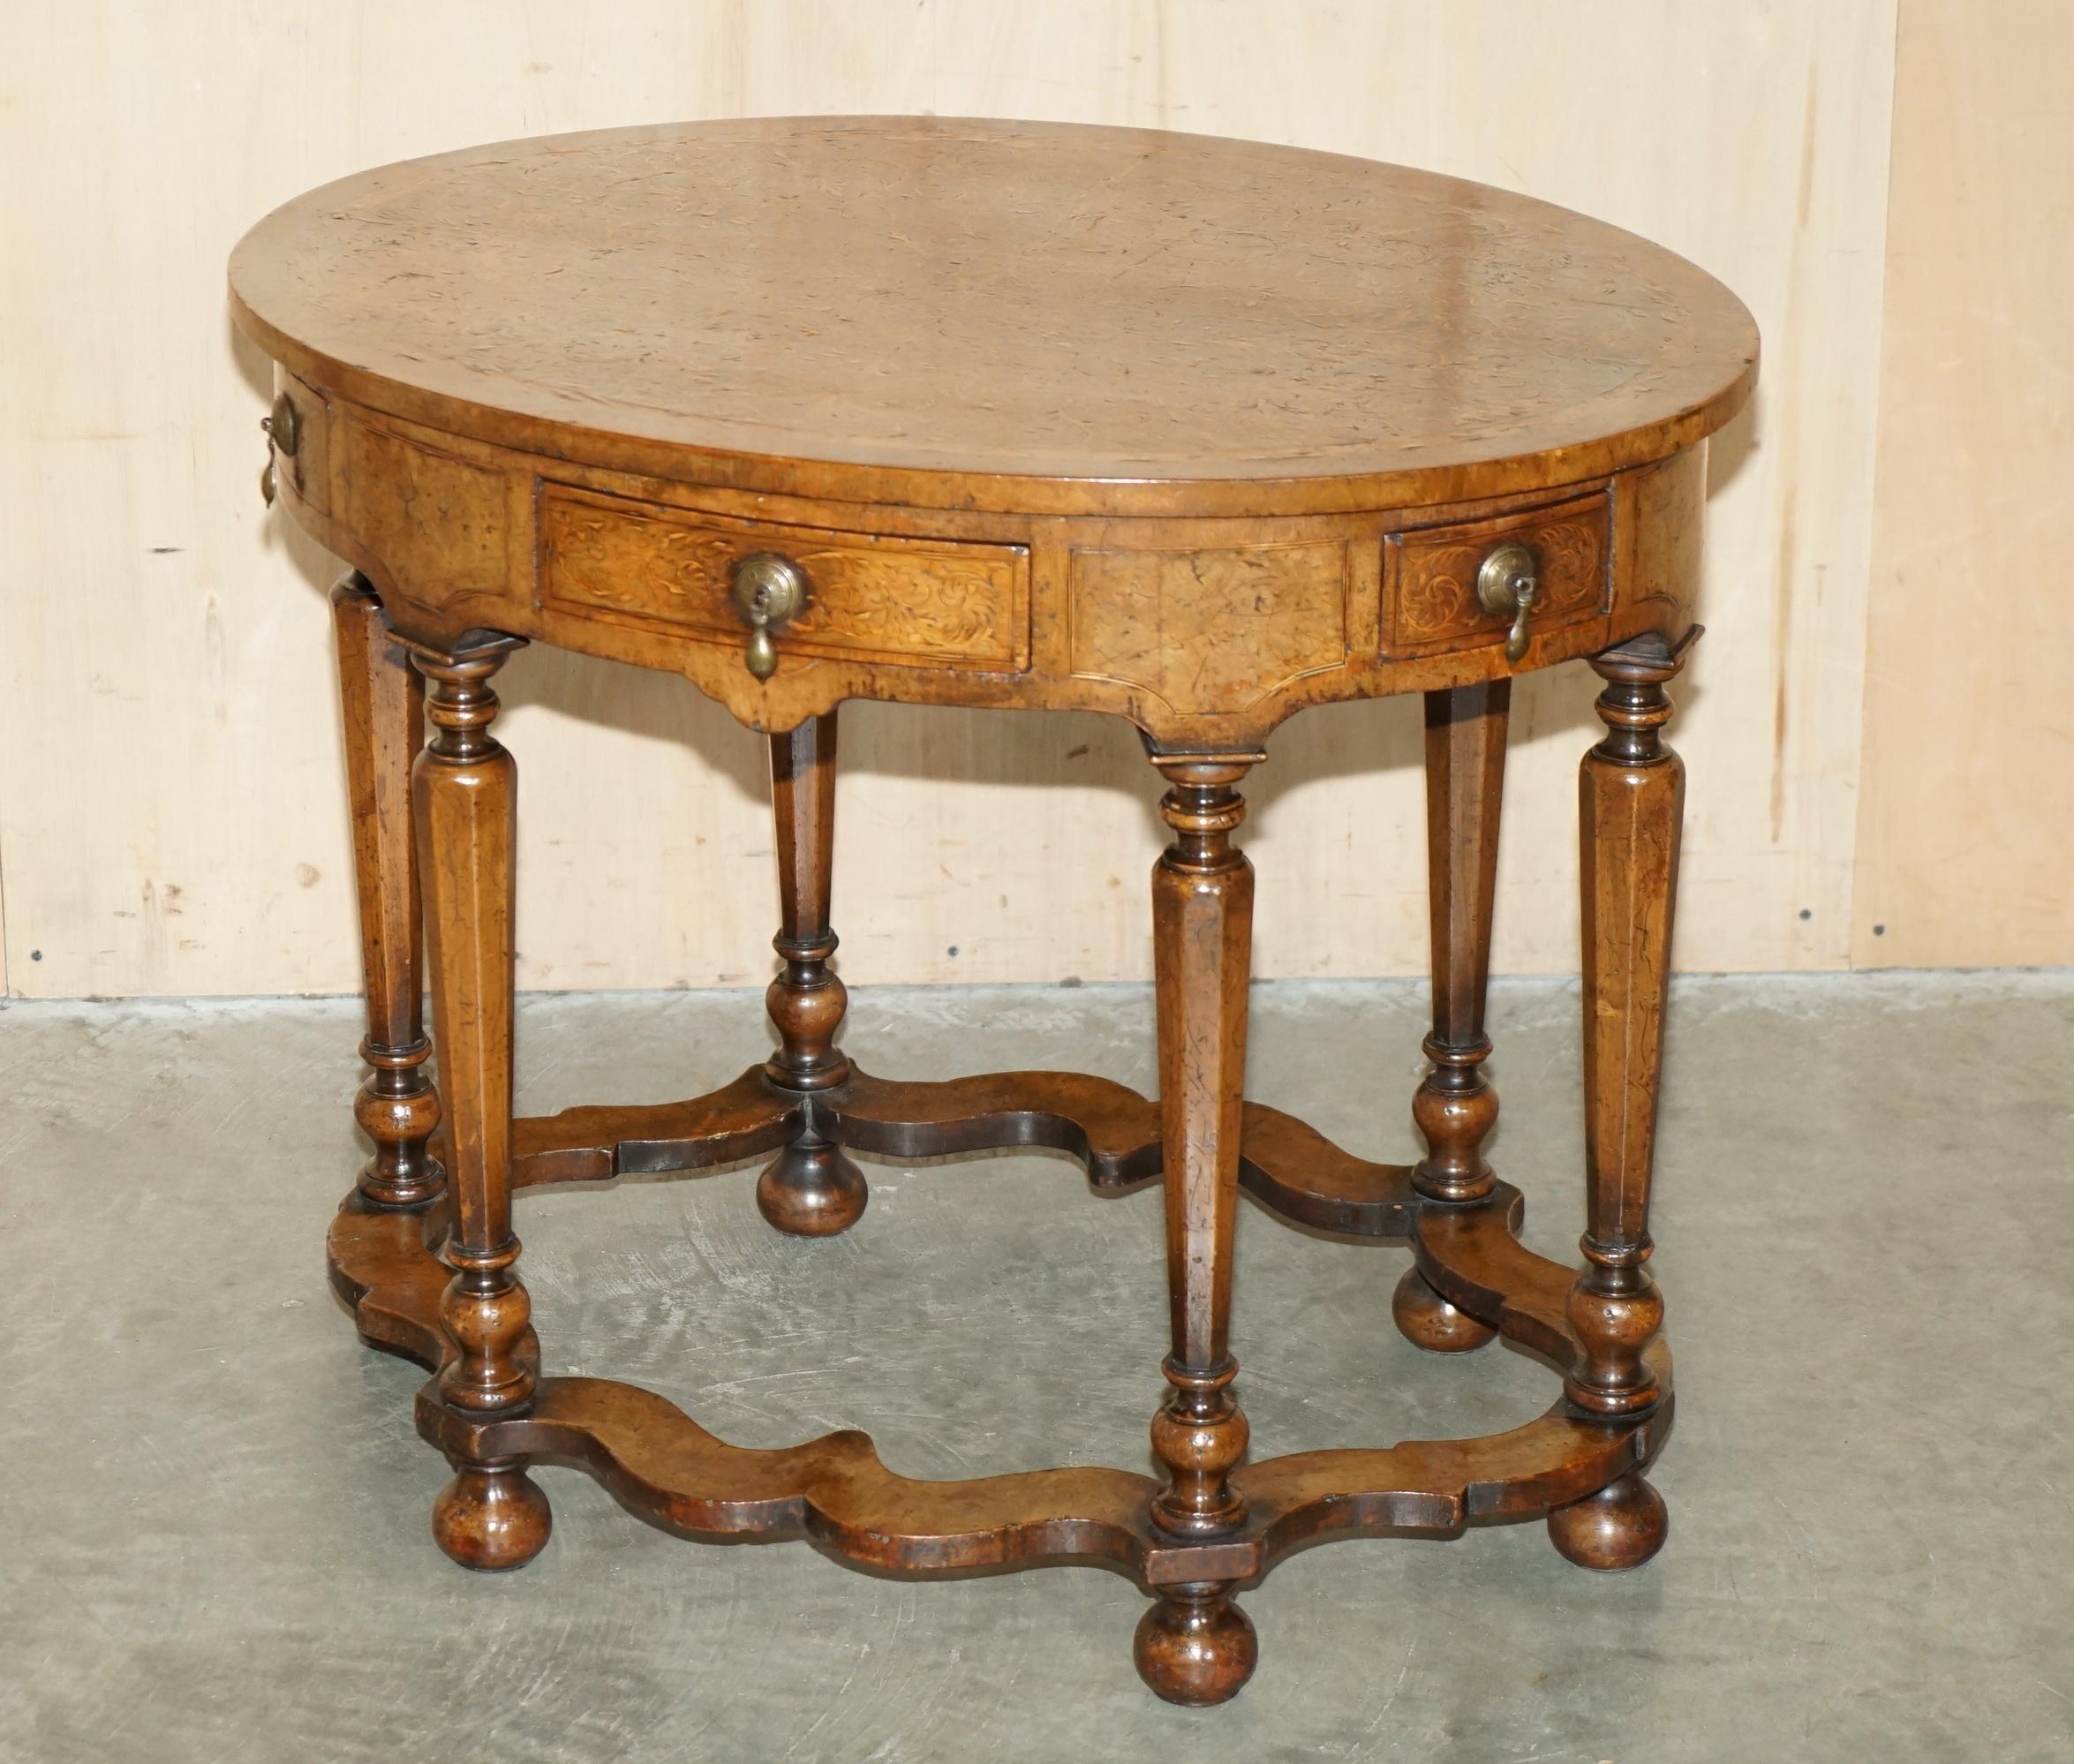 Royal House Antiques

Royal House Antiques is delighted to offer for sale this exquisite, hand made in England, William & Mary circa 1700 Seaweed Marquetry oval centre table on a oak frame which has been fully restored and French polished  

Please